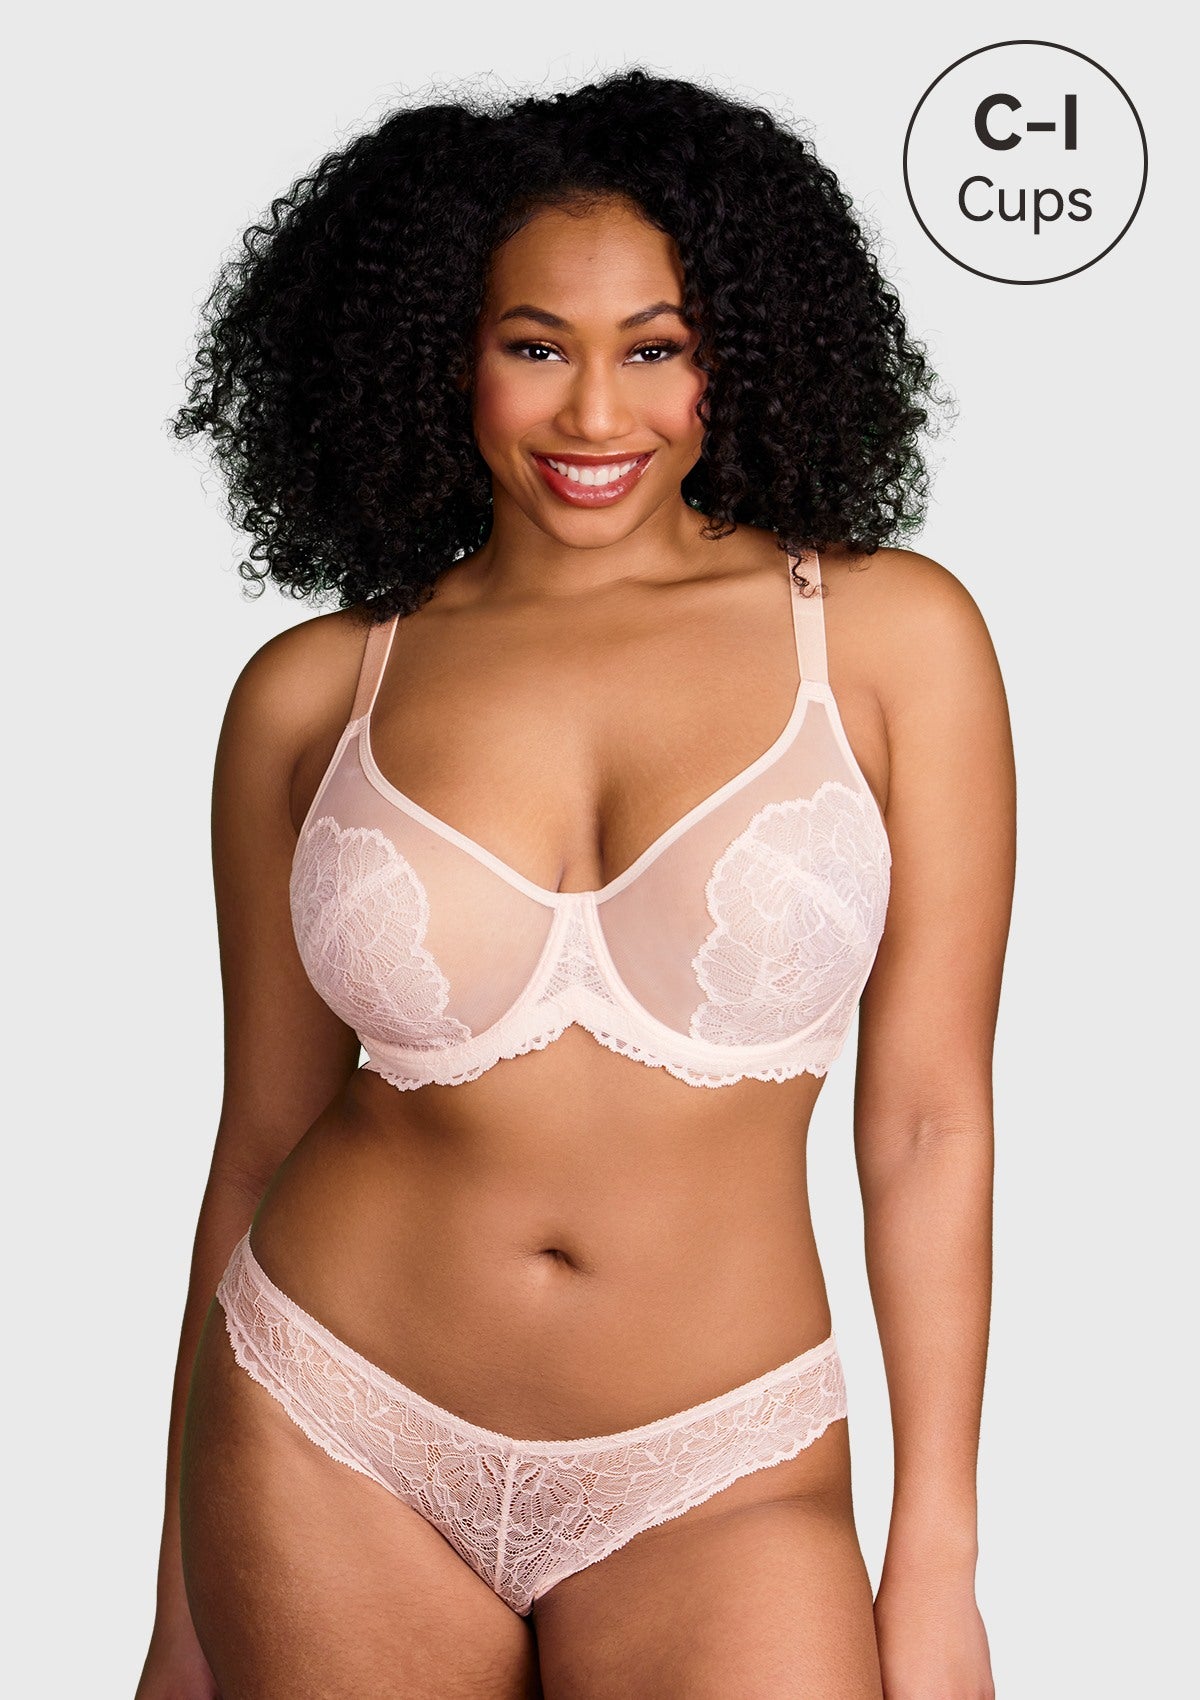 HSIA Blossom Sheer Lace Bra: Comfortable Underwire Bra For Big Busts - White / 36 / D